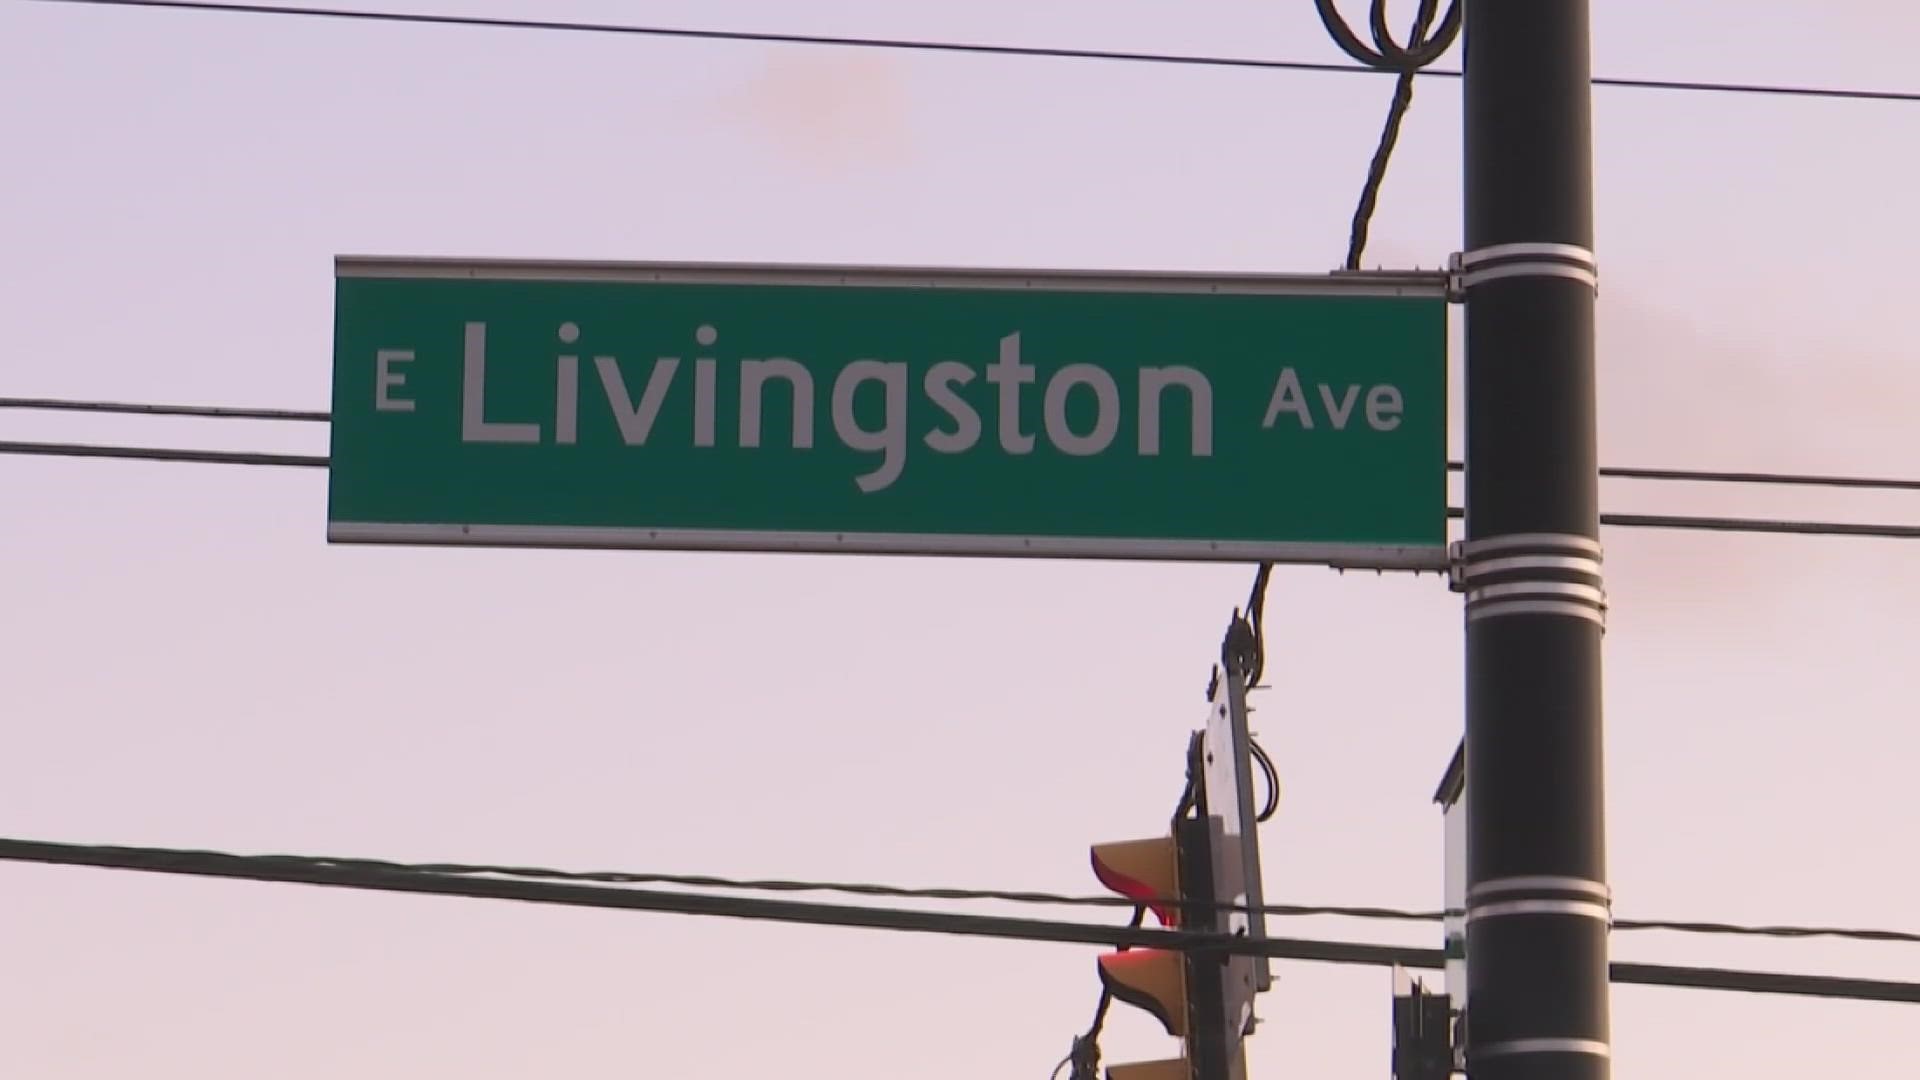 The city is getting $12 million in federal money to improve East Livingston Avenue.